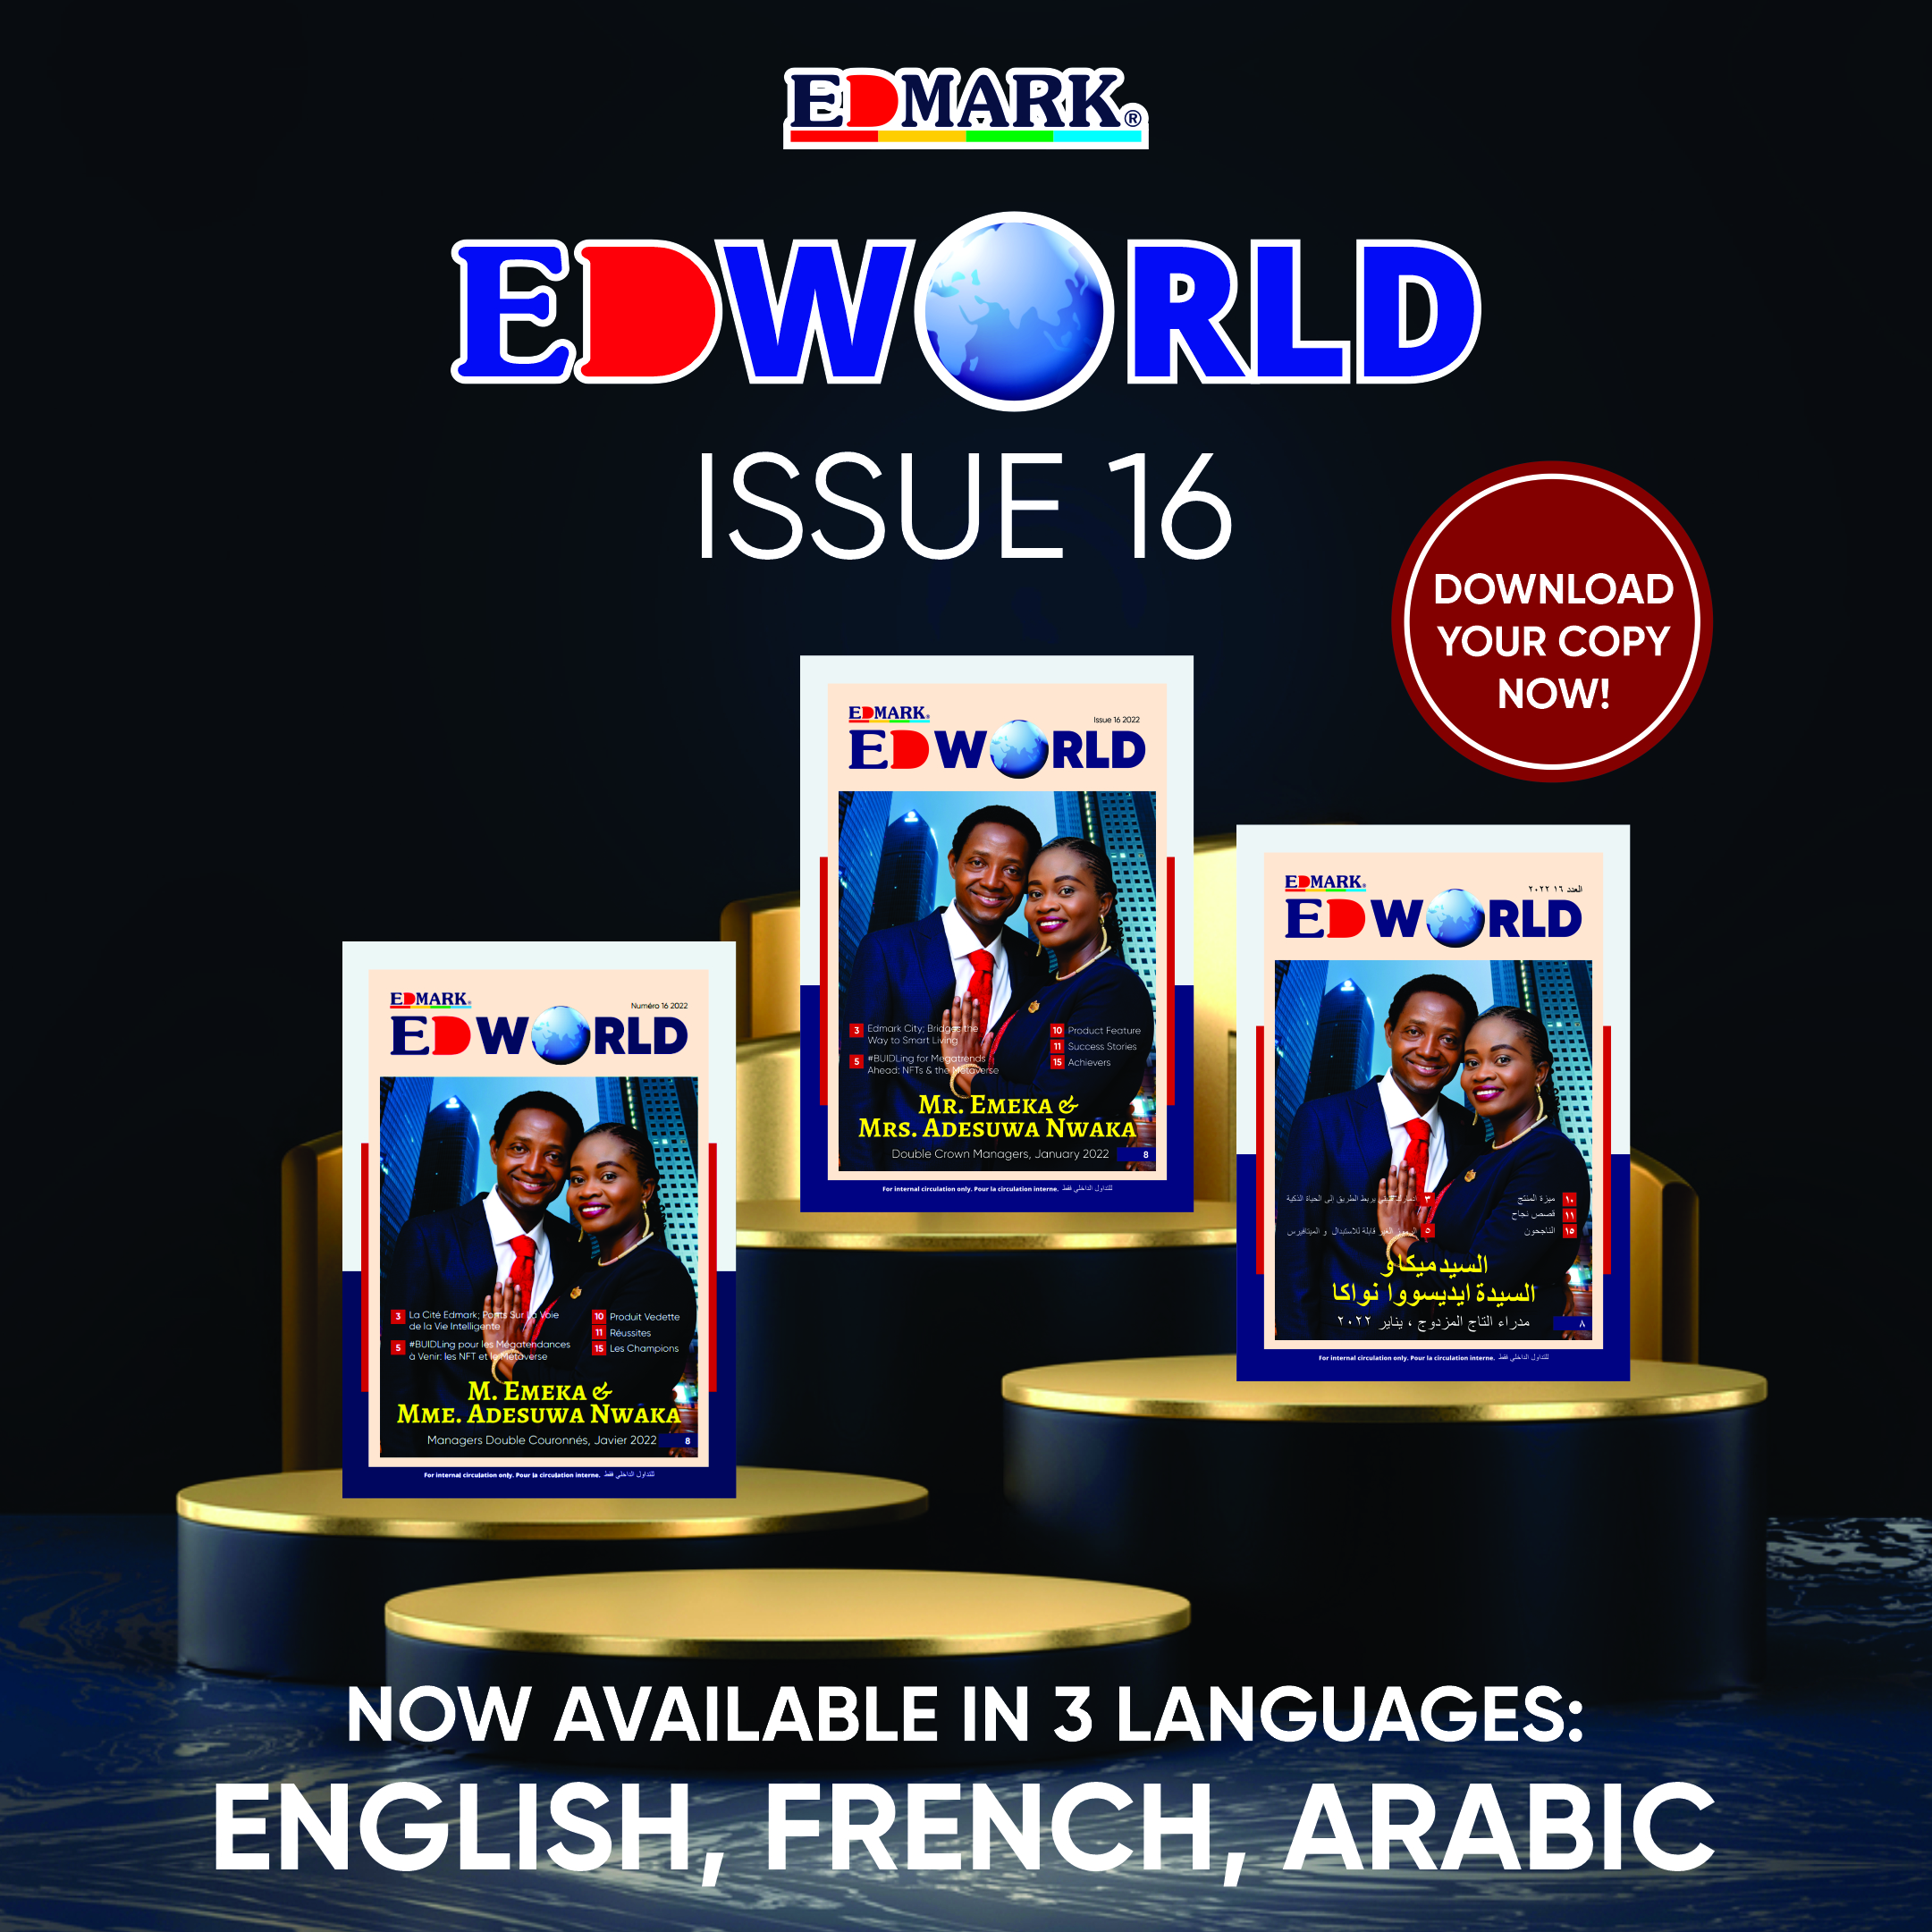 EDWORLD Issue 16 – Complete Edition